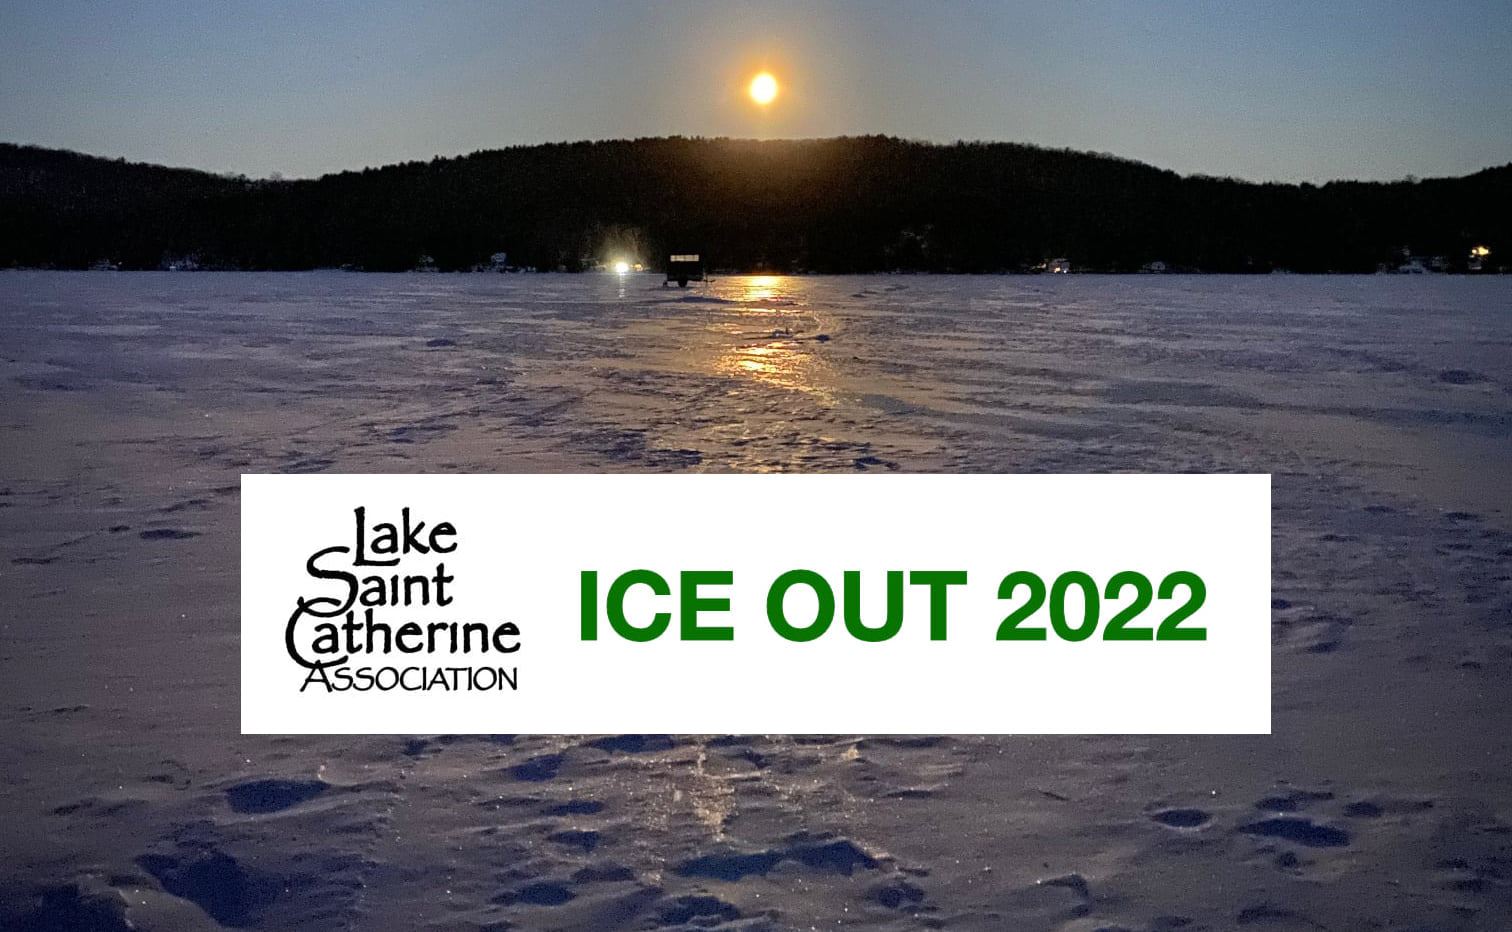 Ice Out 2022 on Lake St. Catherine